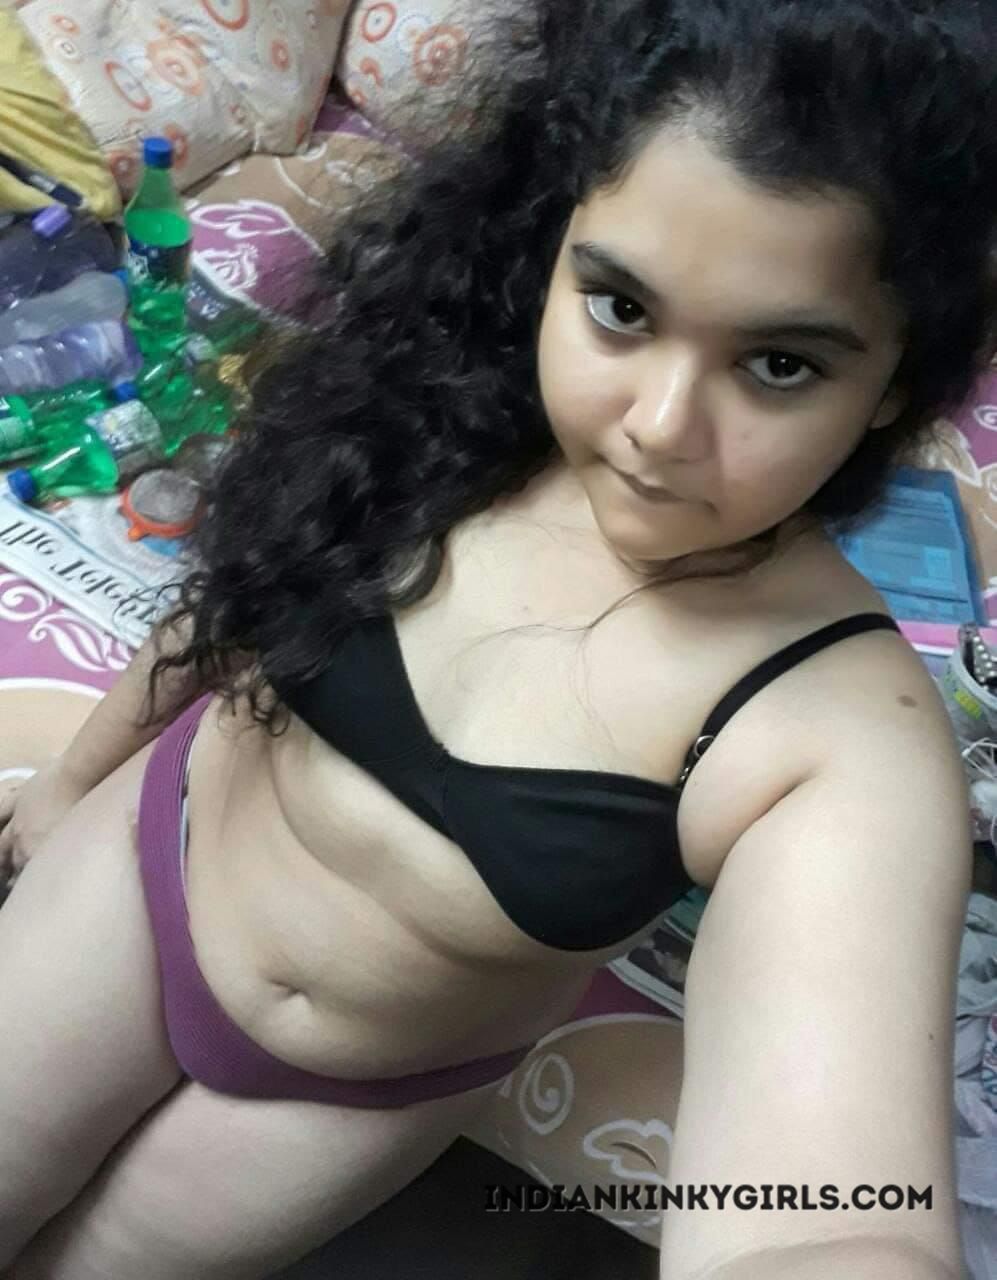 Cute Desi Girlfriend Nude With Hairy Pussy Indian Nude Girls image